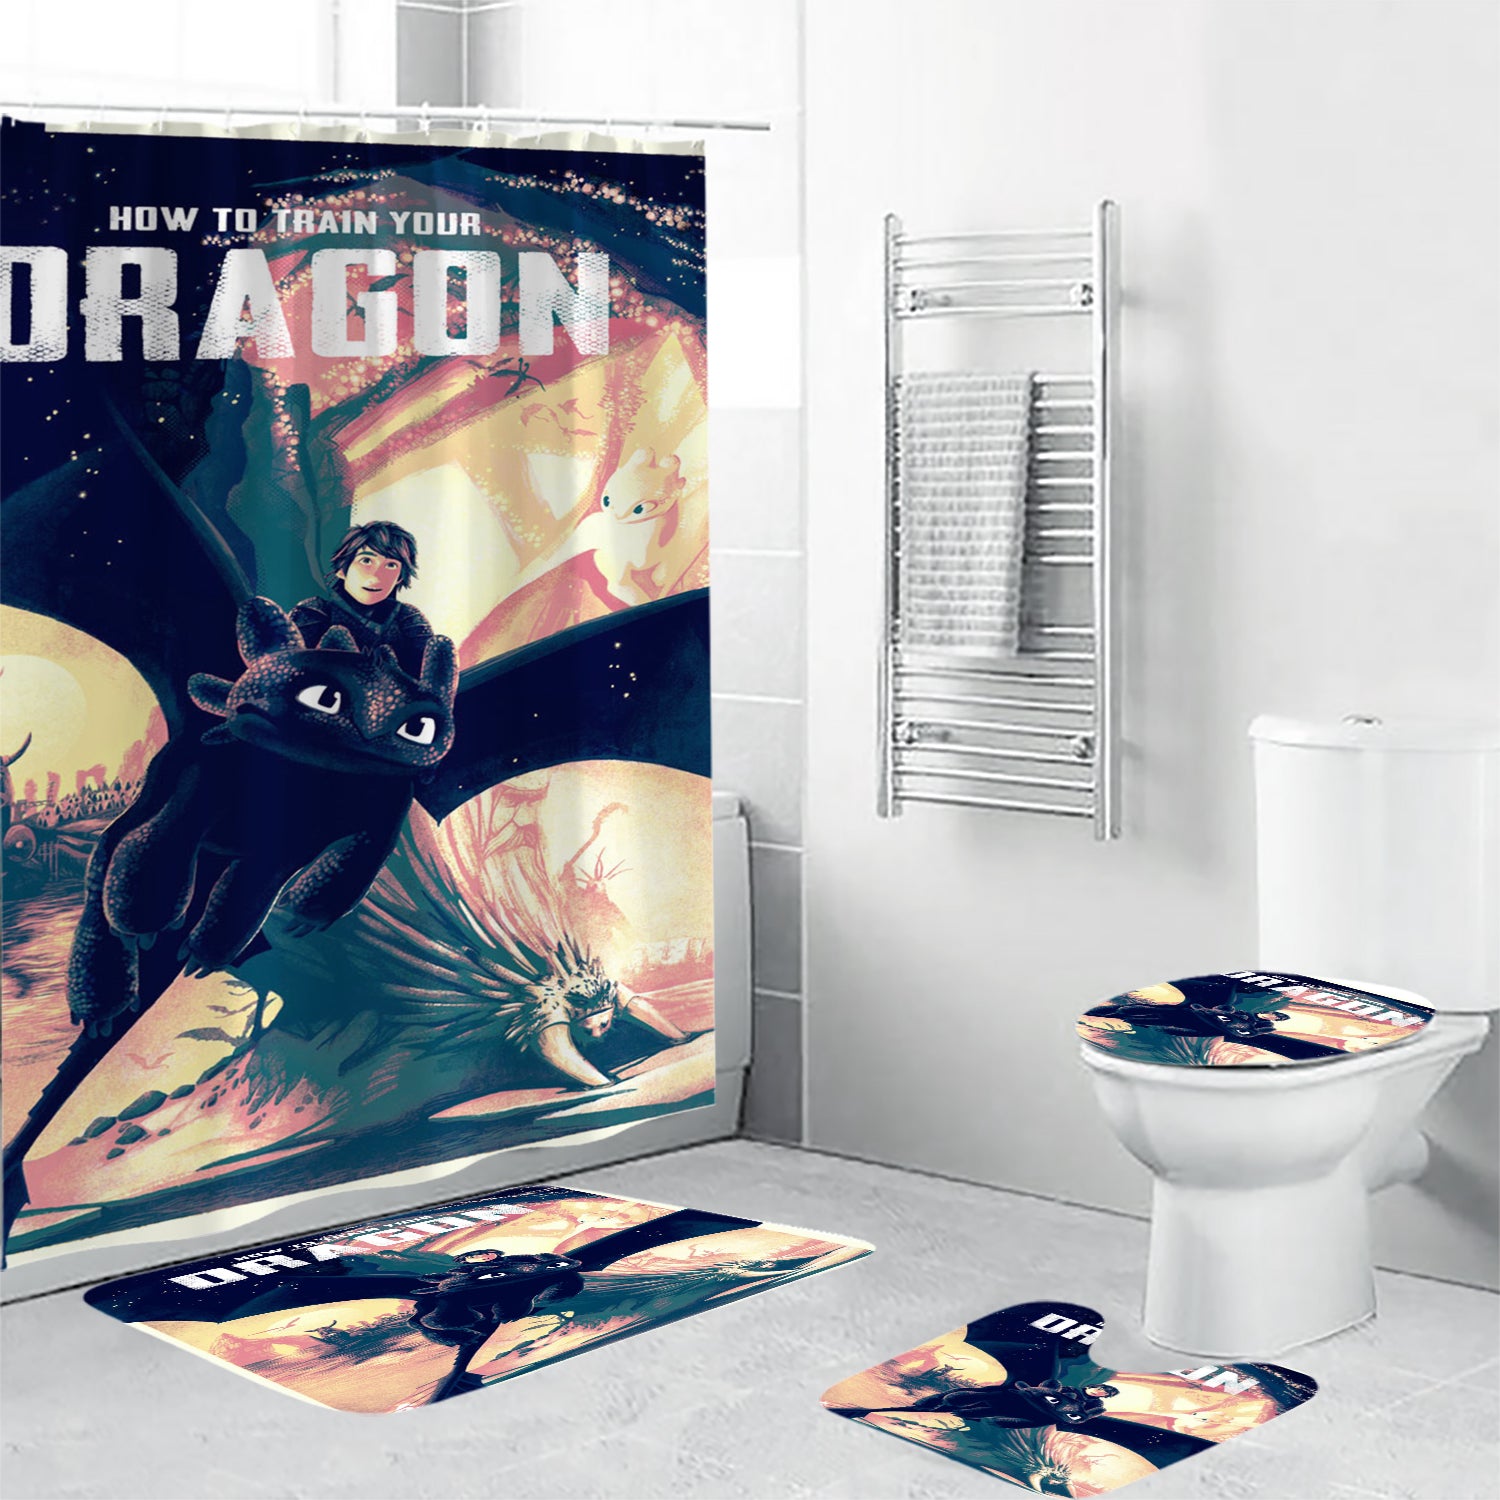 How to Train Your Dragon Poster 6 Waterproof Shower Curtain Non-Slip Toilet Lid Cover Bath Mat - Bathroom Set